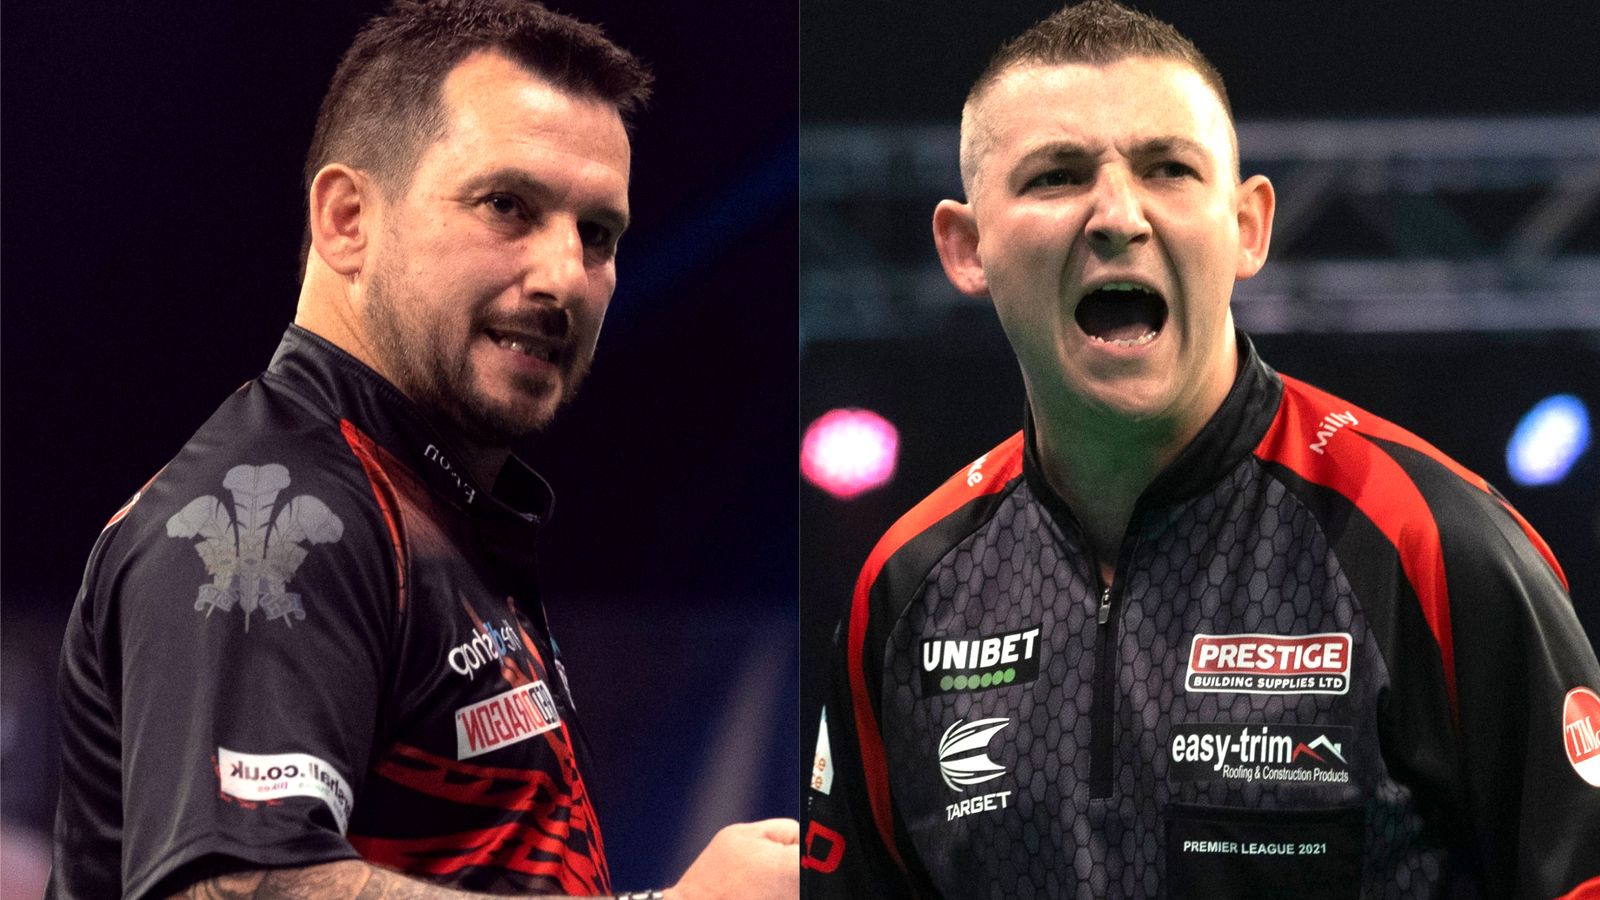 Premier League Darts: Laura Turner on the final league night featuring Jonny Clayton, Gerwyn Price and Michael Smith | Darts News